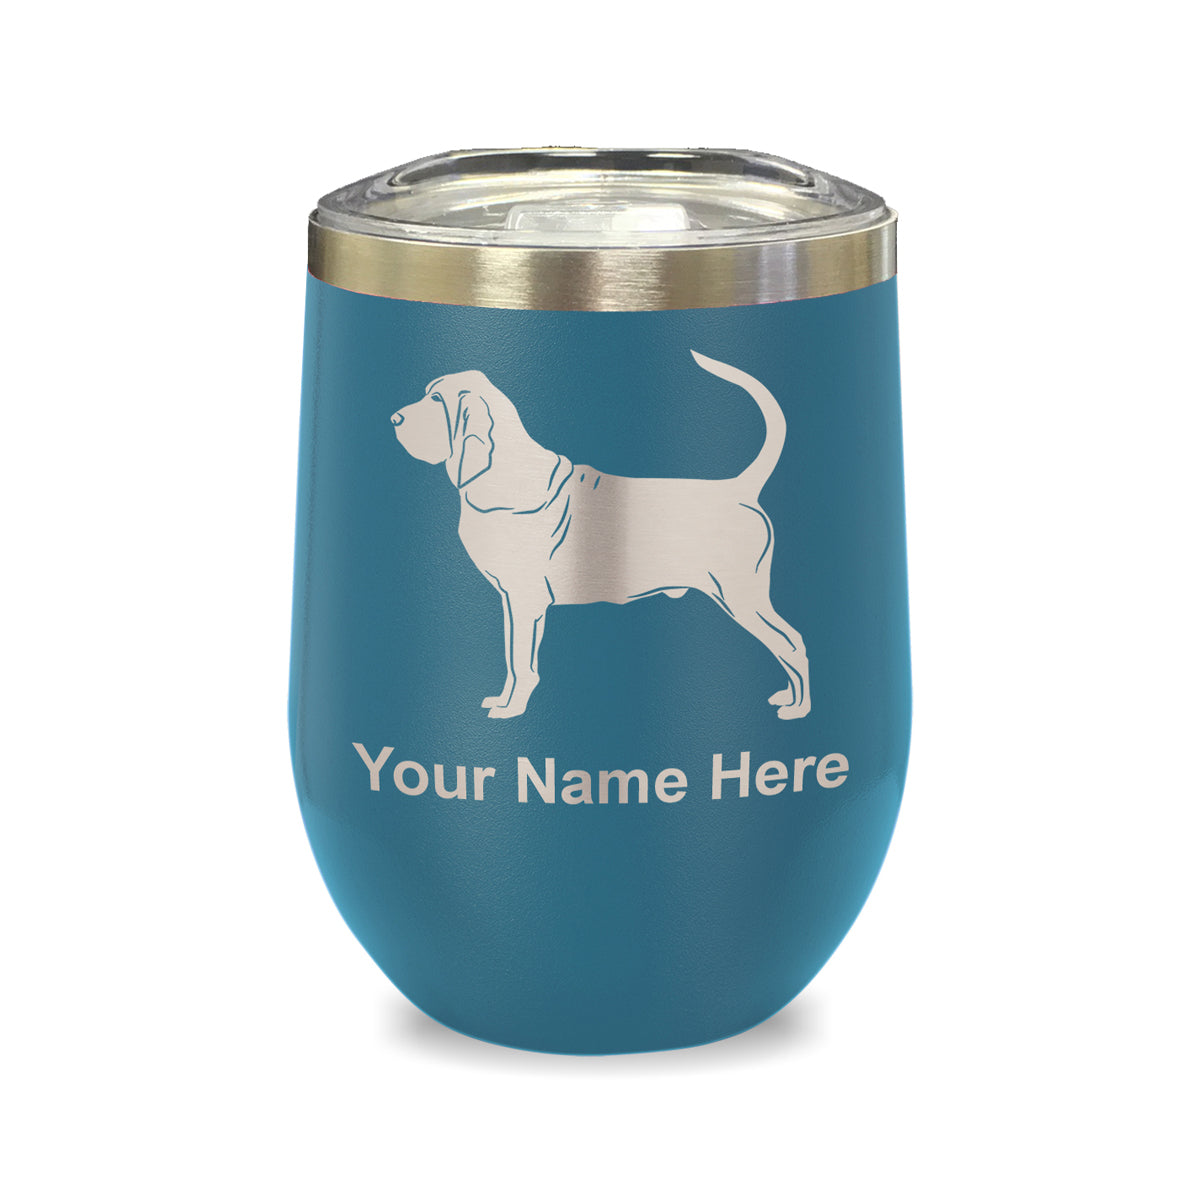 LaserGram Double Wall Stainless Steel Wine Glass, Bloodhound Dog, Personalized Engraving Included